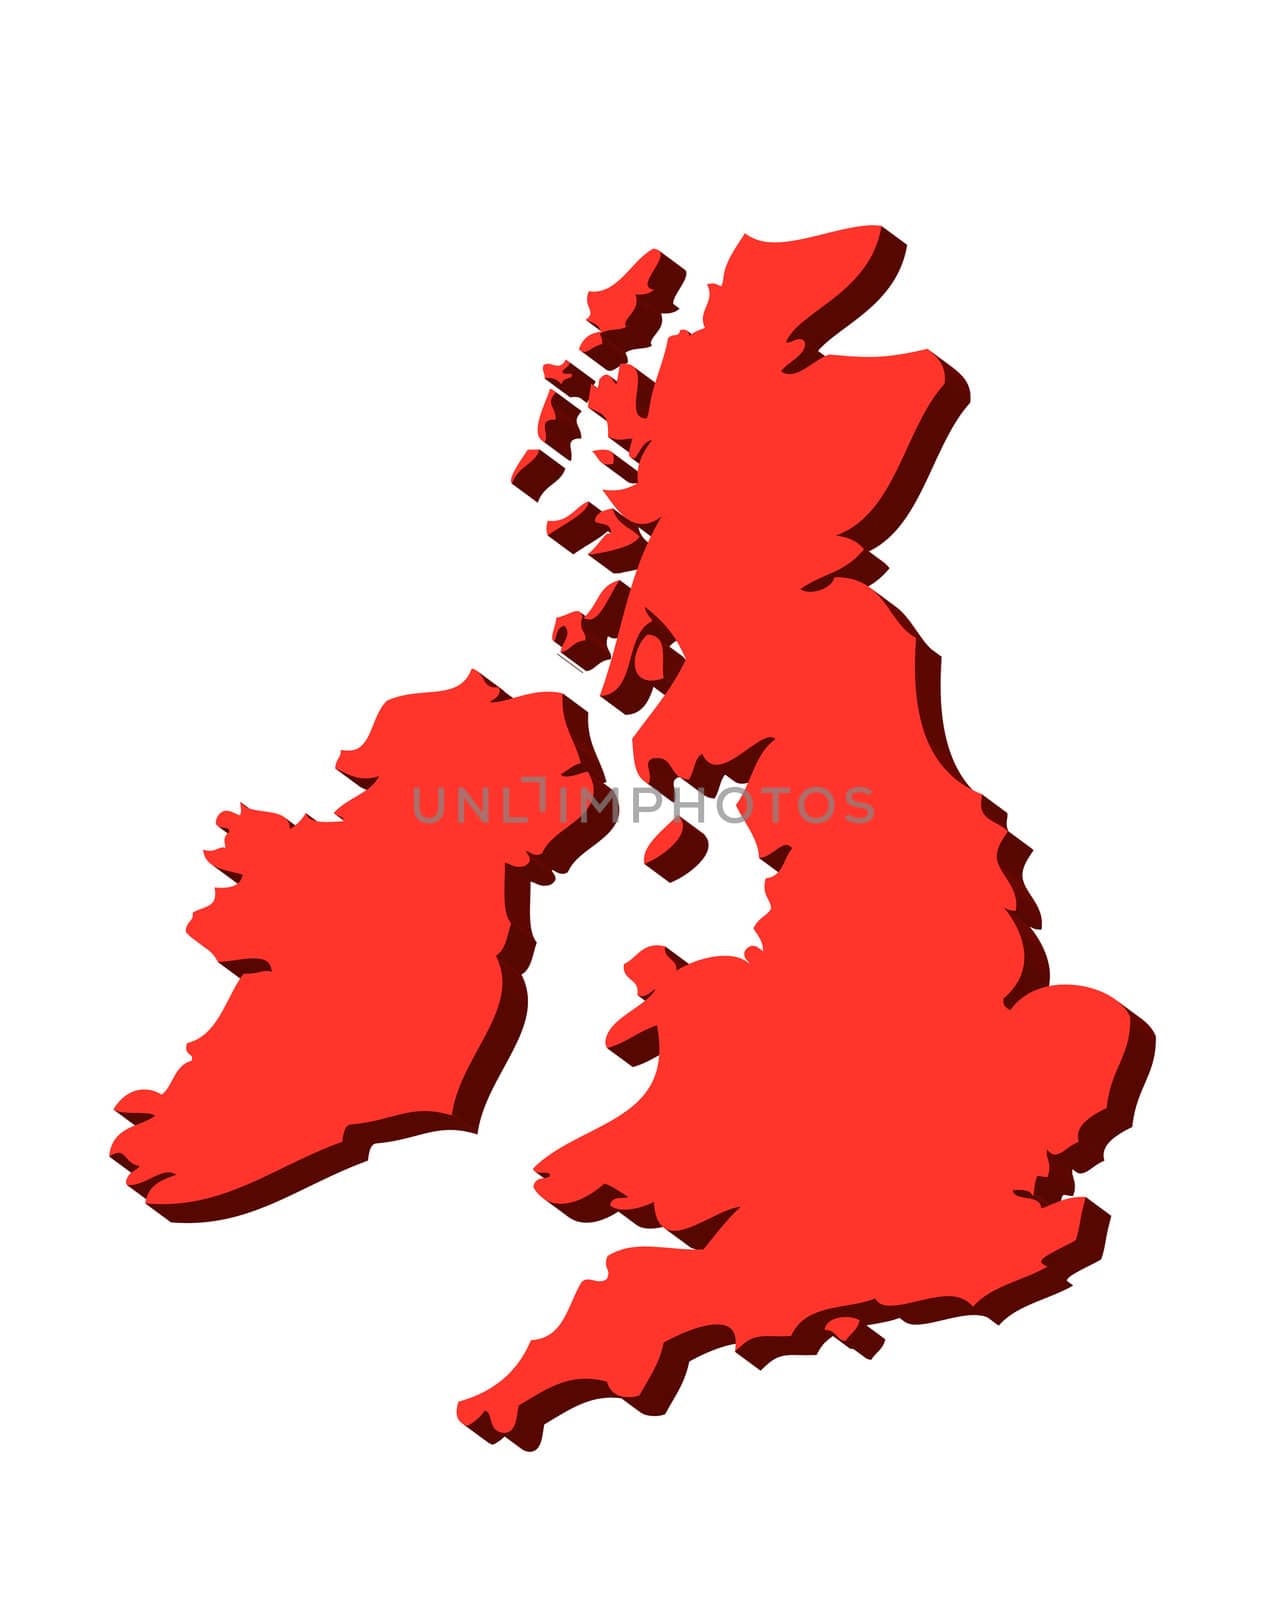 3D outline map of UK and Ireland in red